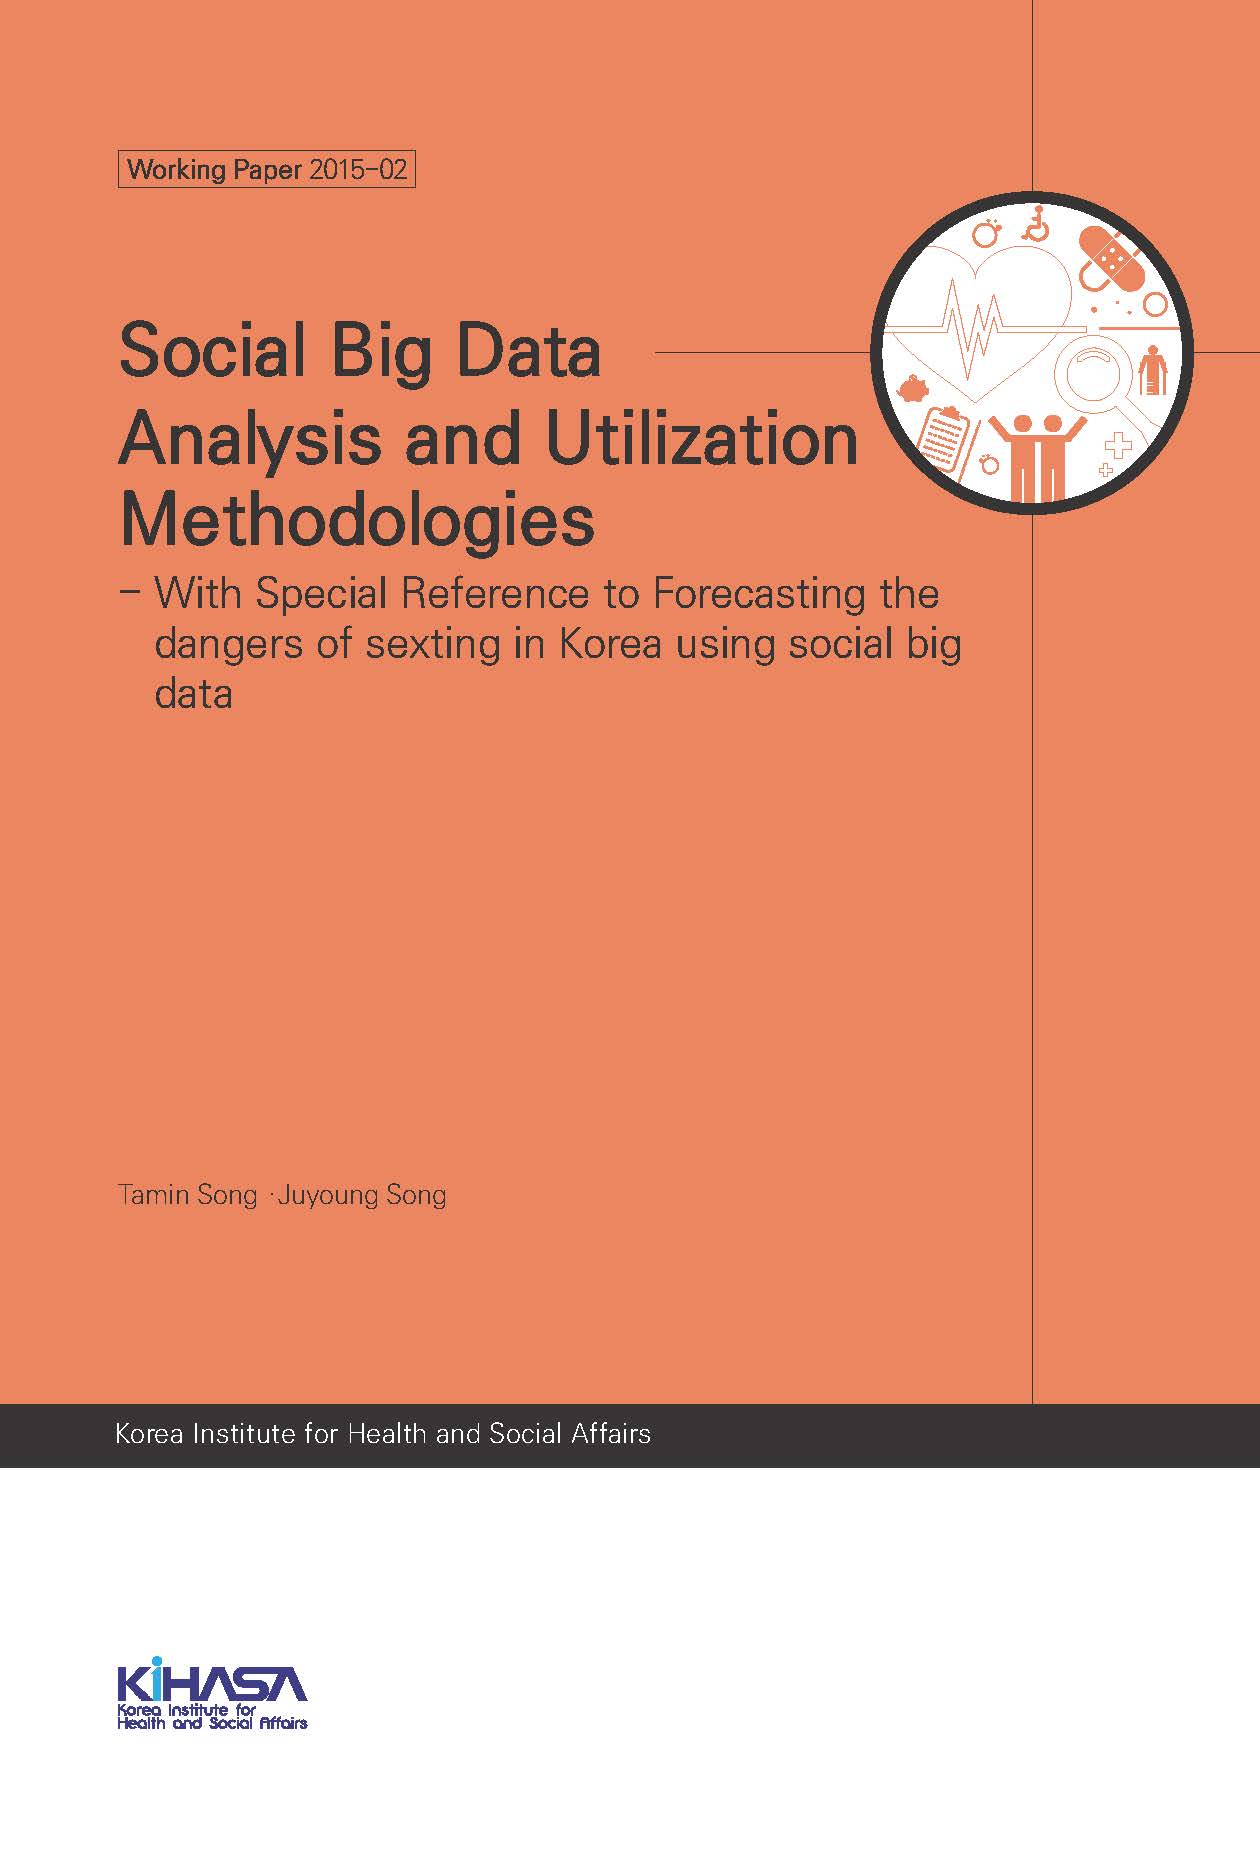 Social Big Data Analysis and Utilization Methodologies - With Special Reference to Forecasting the dangers of sexting in Korea using social big data